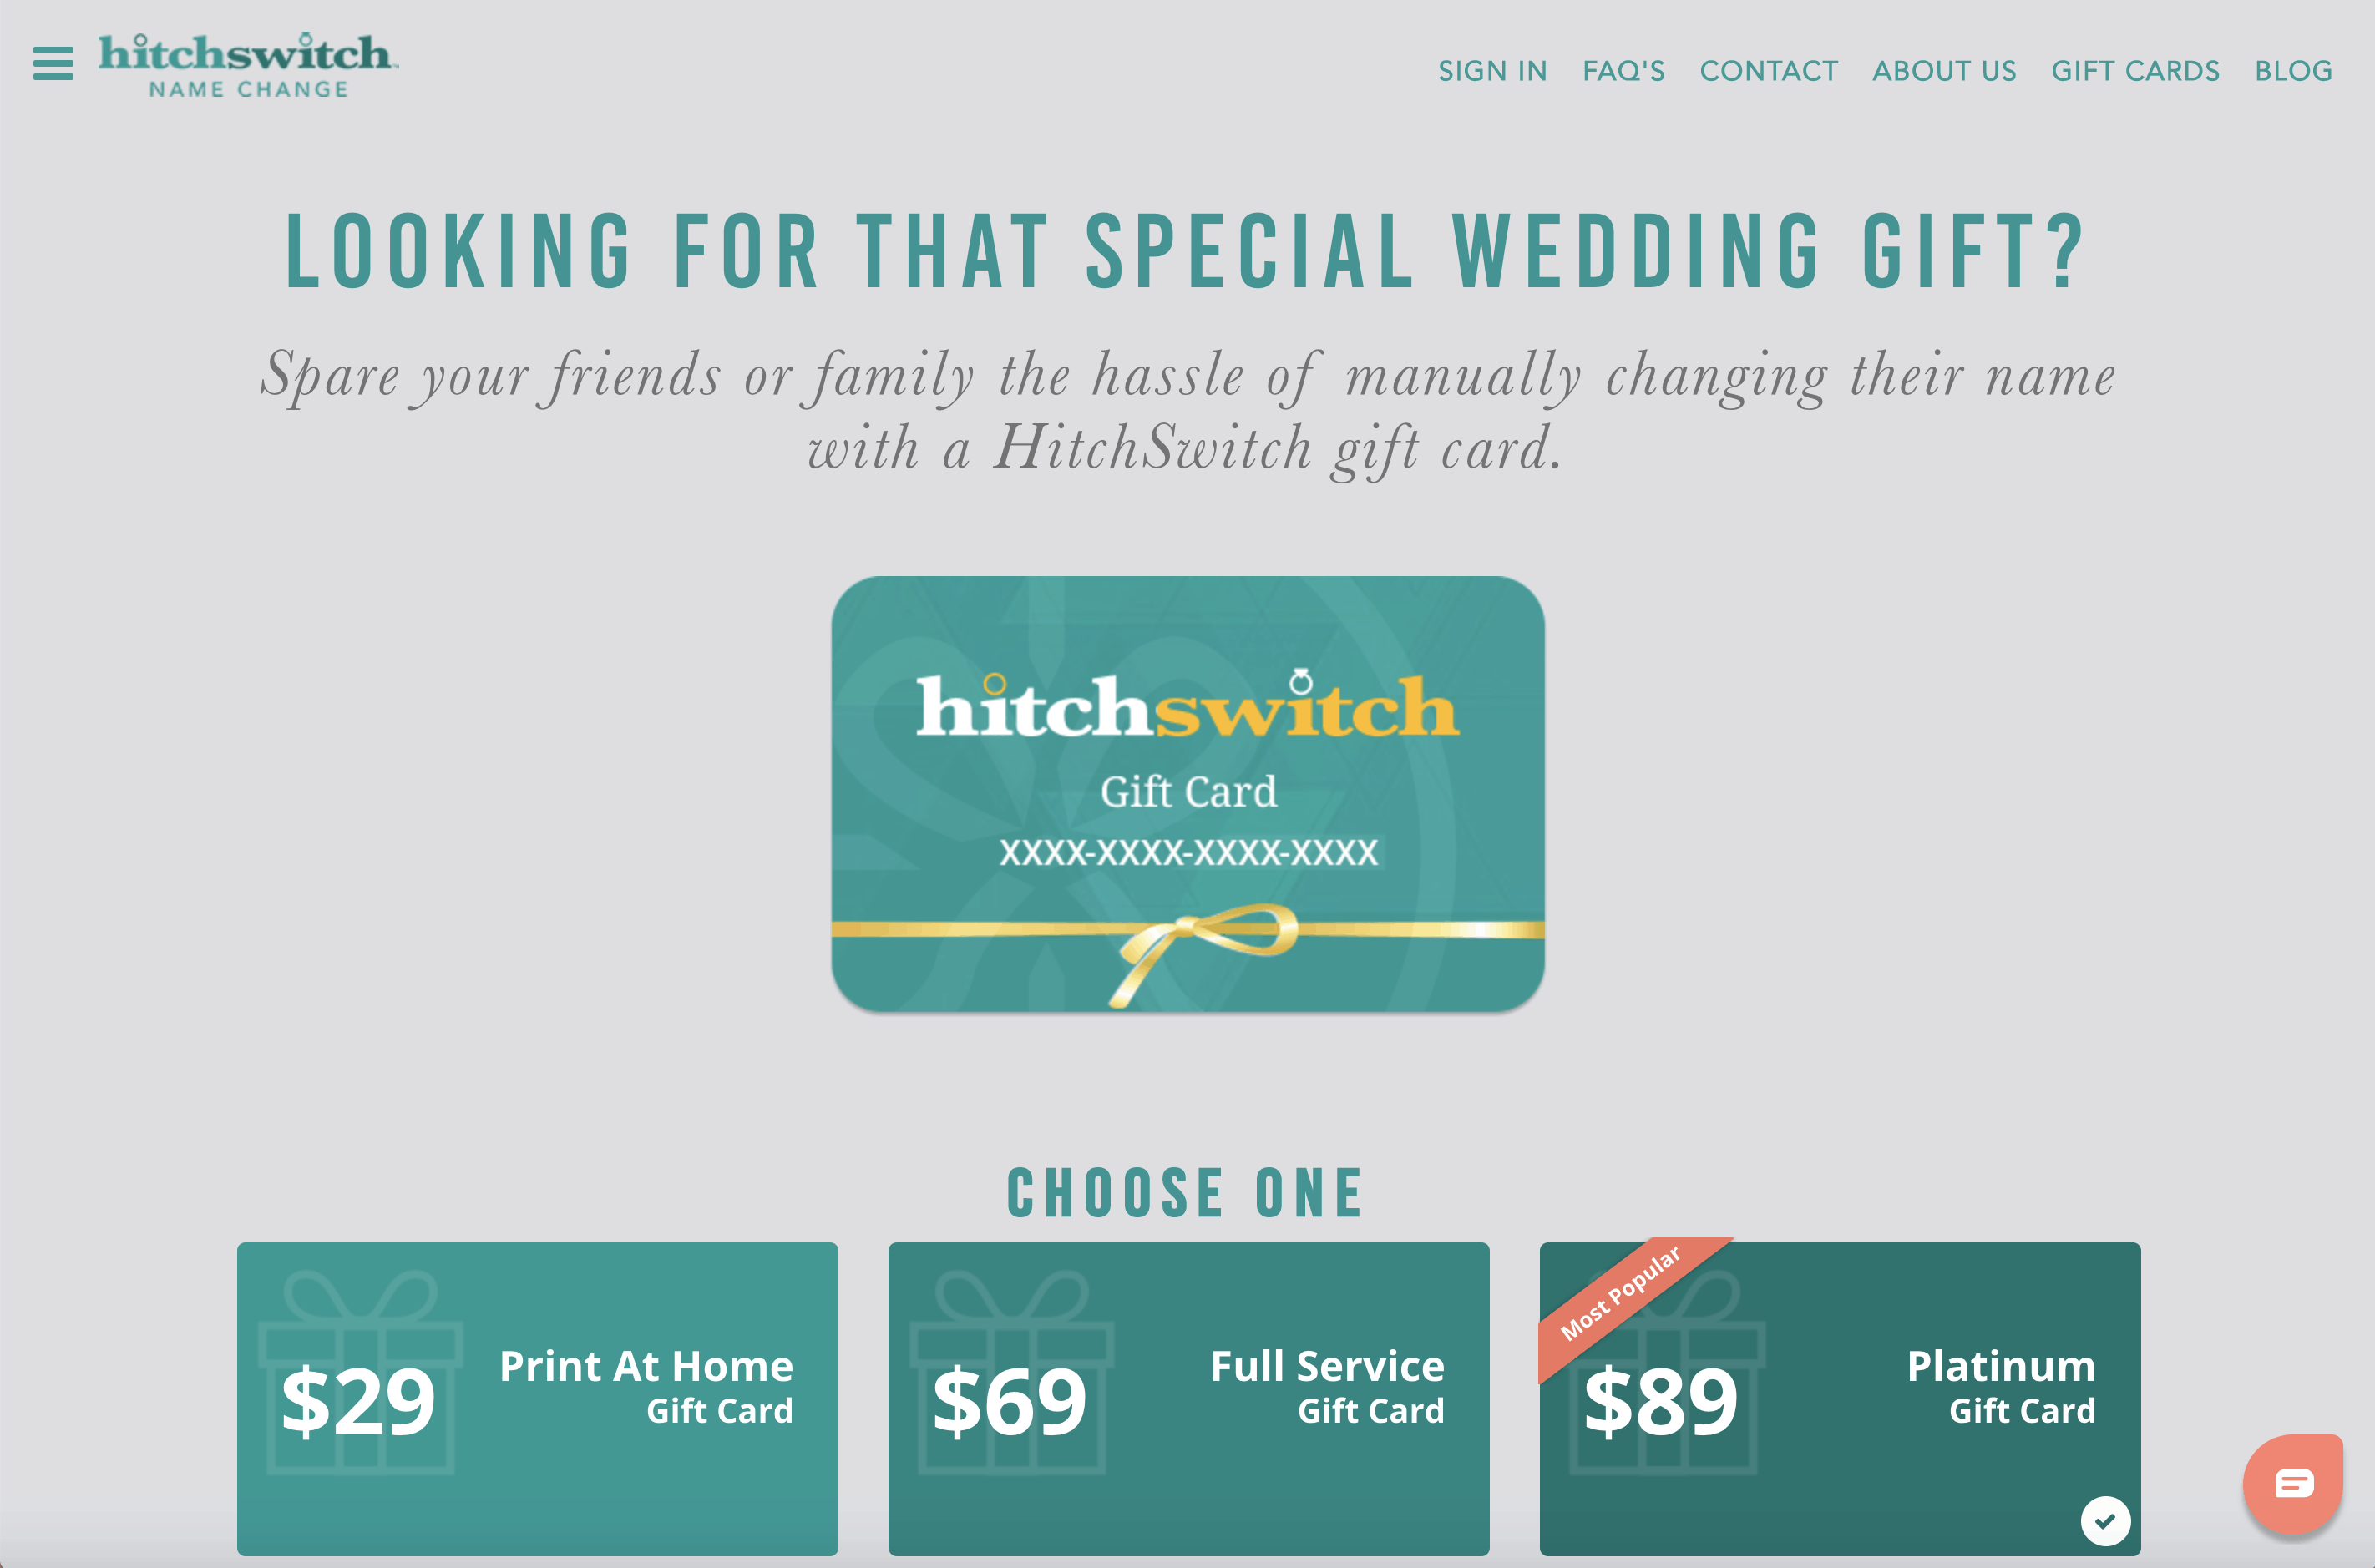 Best Wedding Gift for Your Best Friends Hitch Switch Gift Cards for Wedding Couples